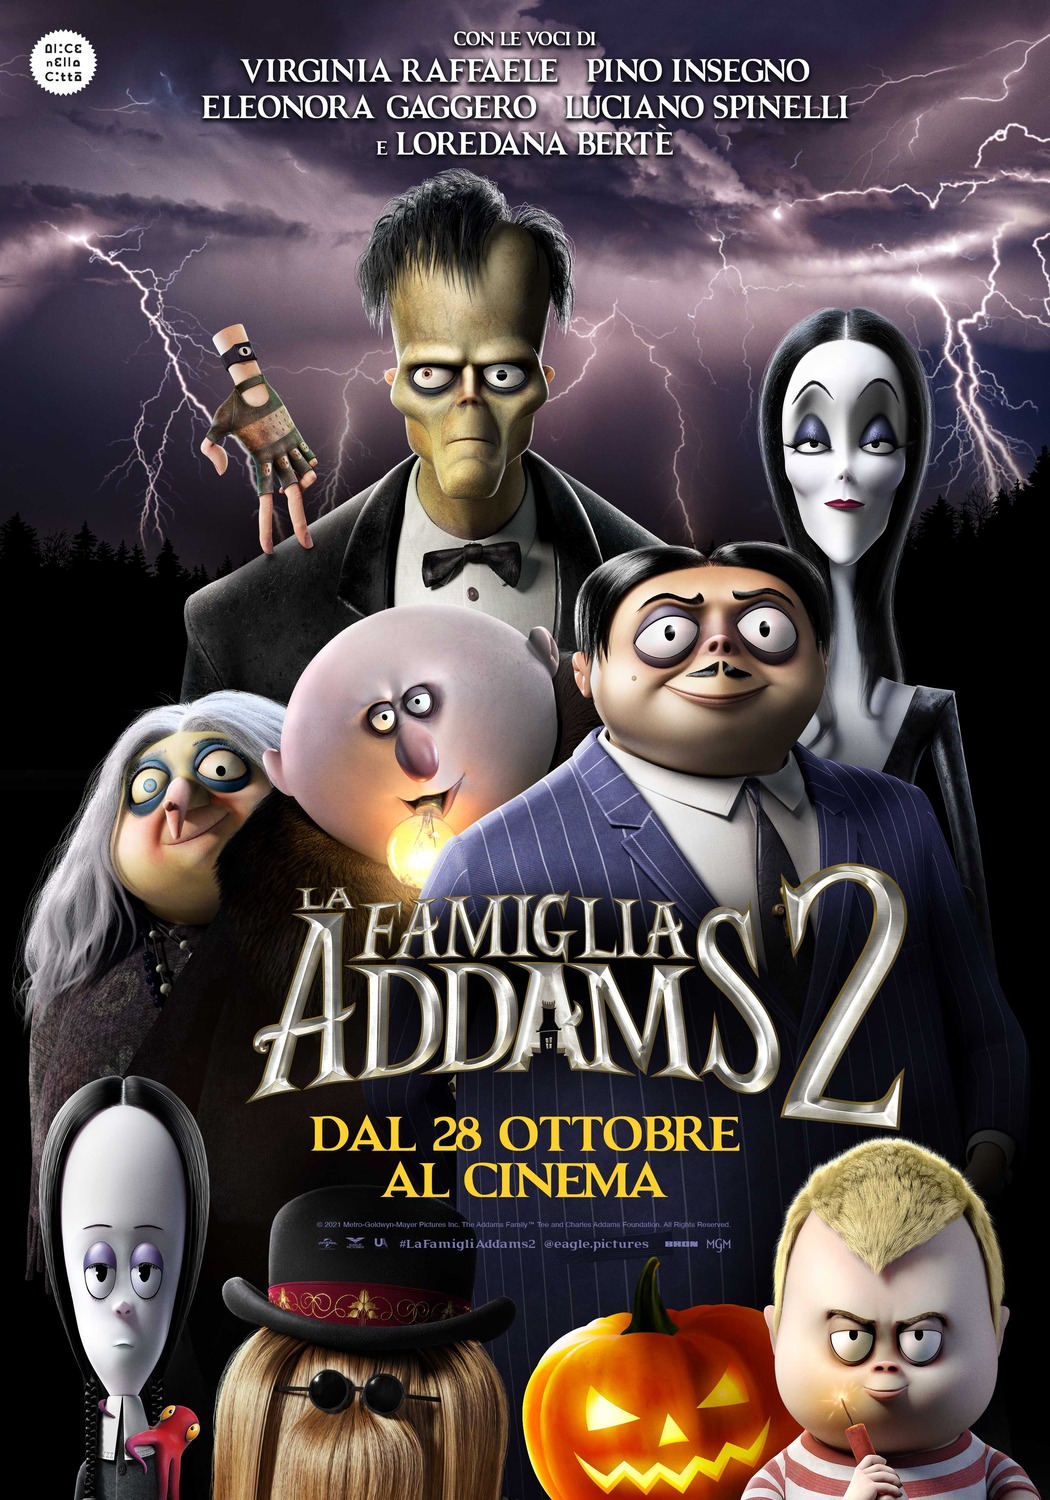 Extra Large Movie Poster Image for The Addams Family 2 (#19 of 19)